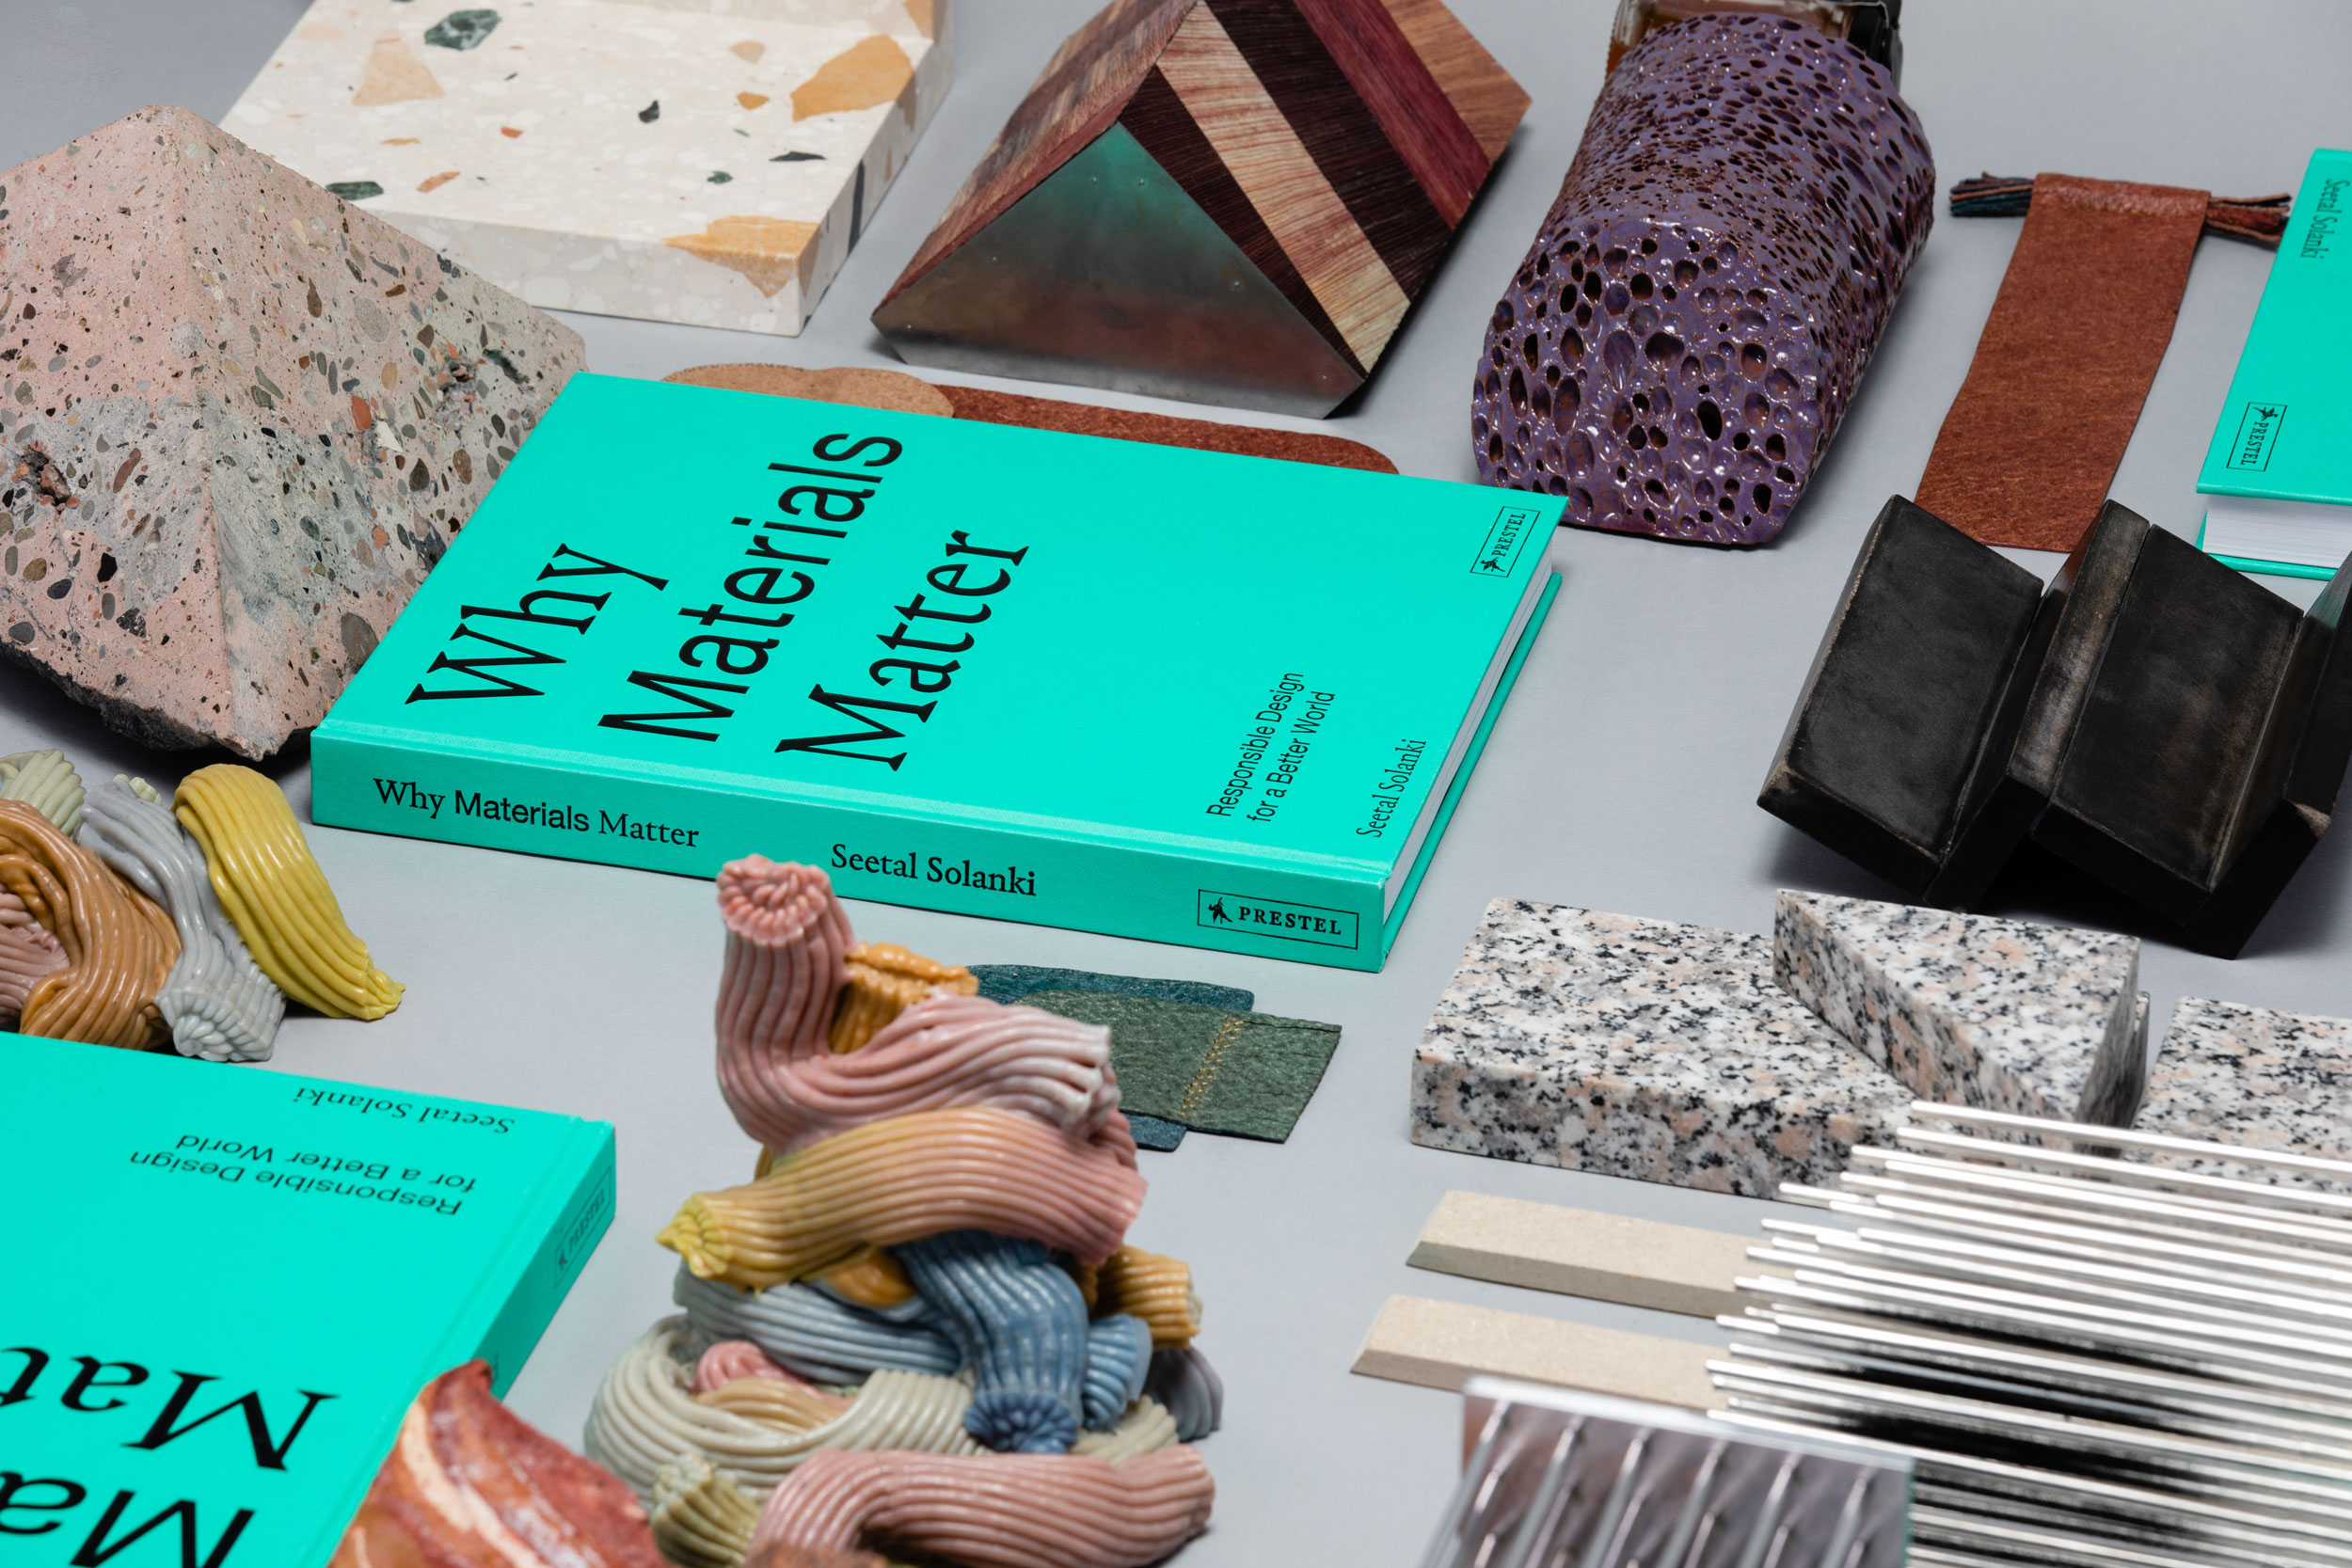 Ma-tt-er - Material Design Interview with Creative Review